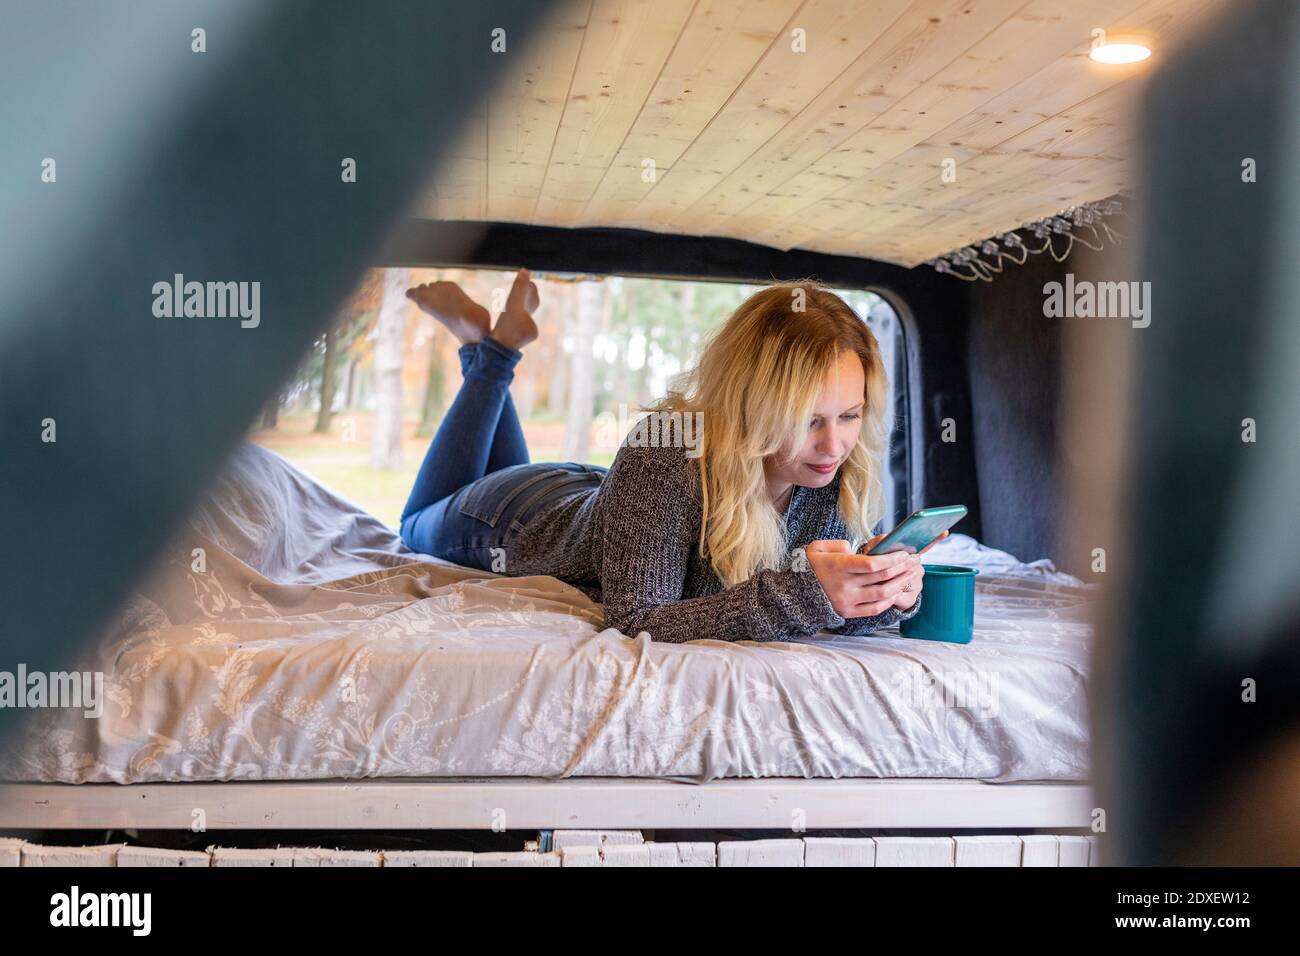 Mid adult woman using smart phone on bed in motor home Stock Photo